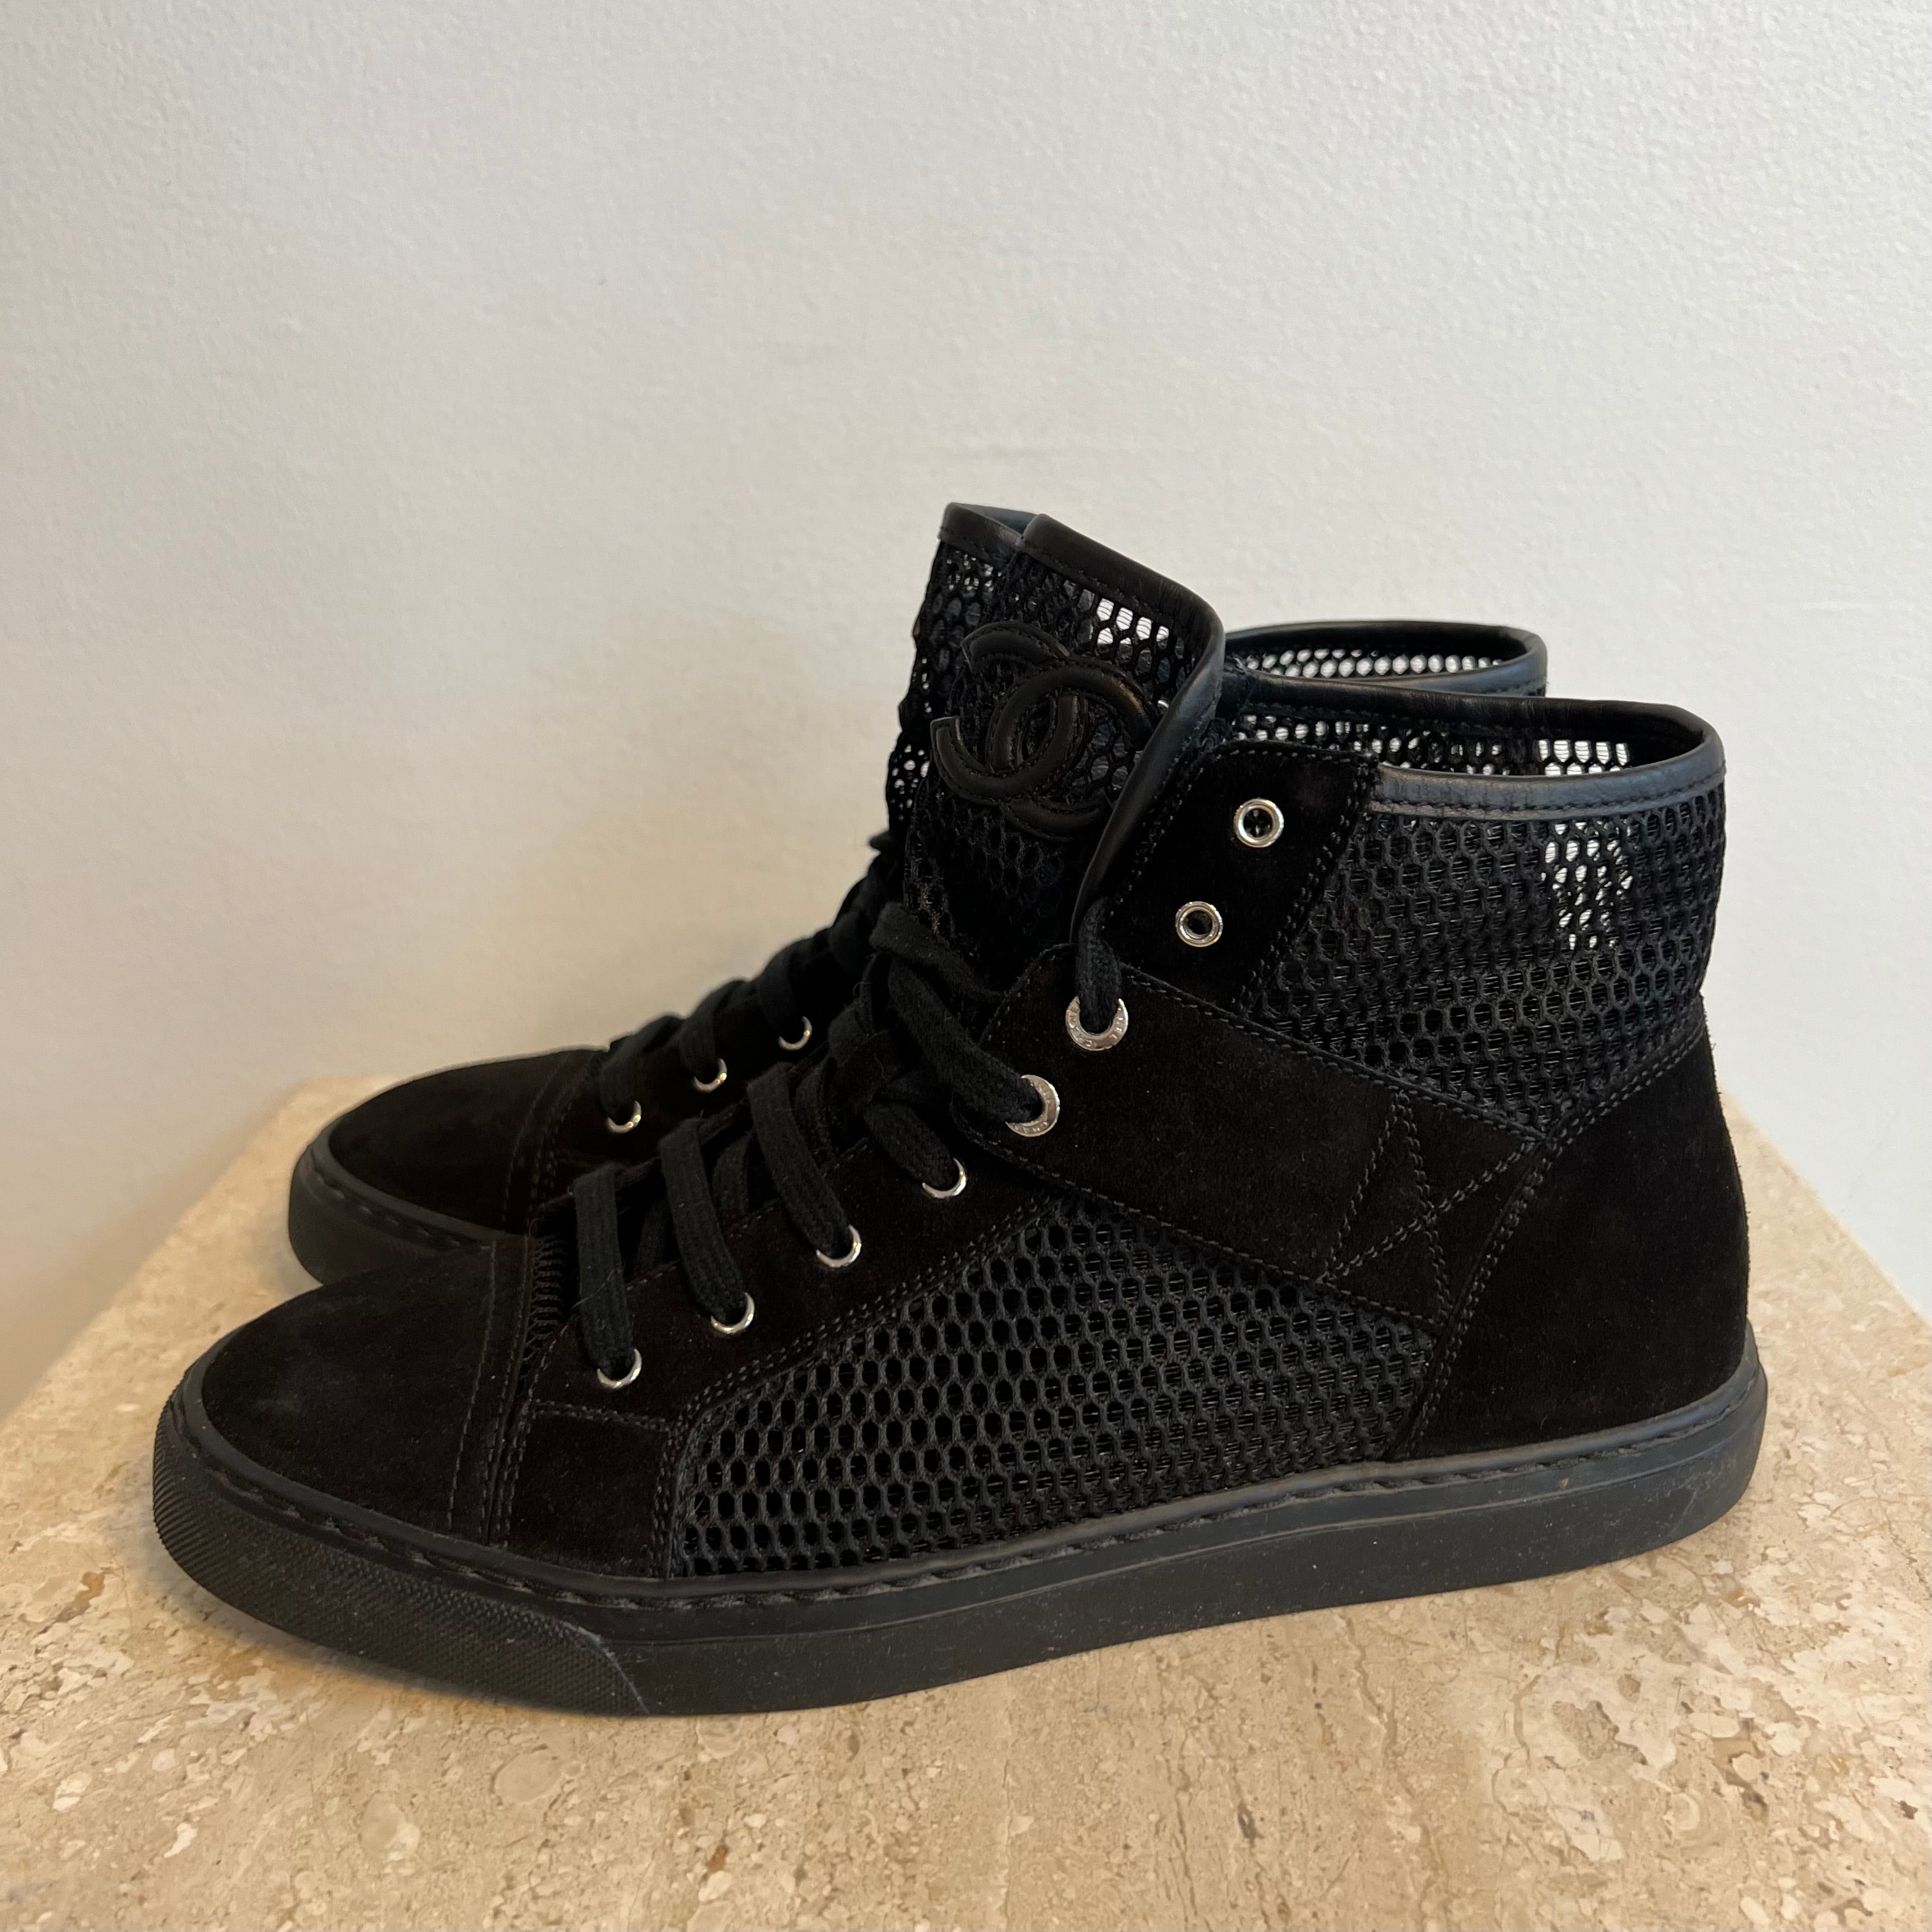 Pre-Owned CHANEL Black Mesh/Suede Sneaker - Size 39